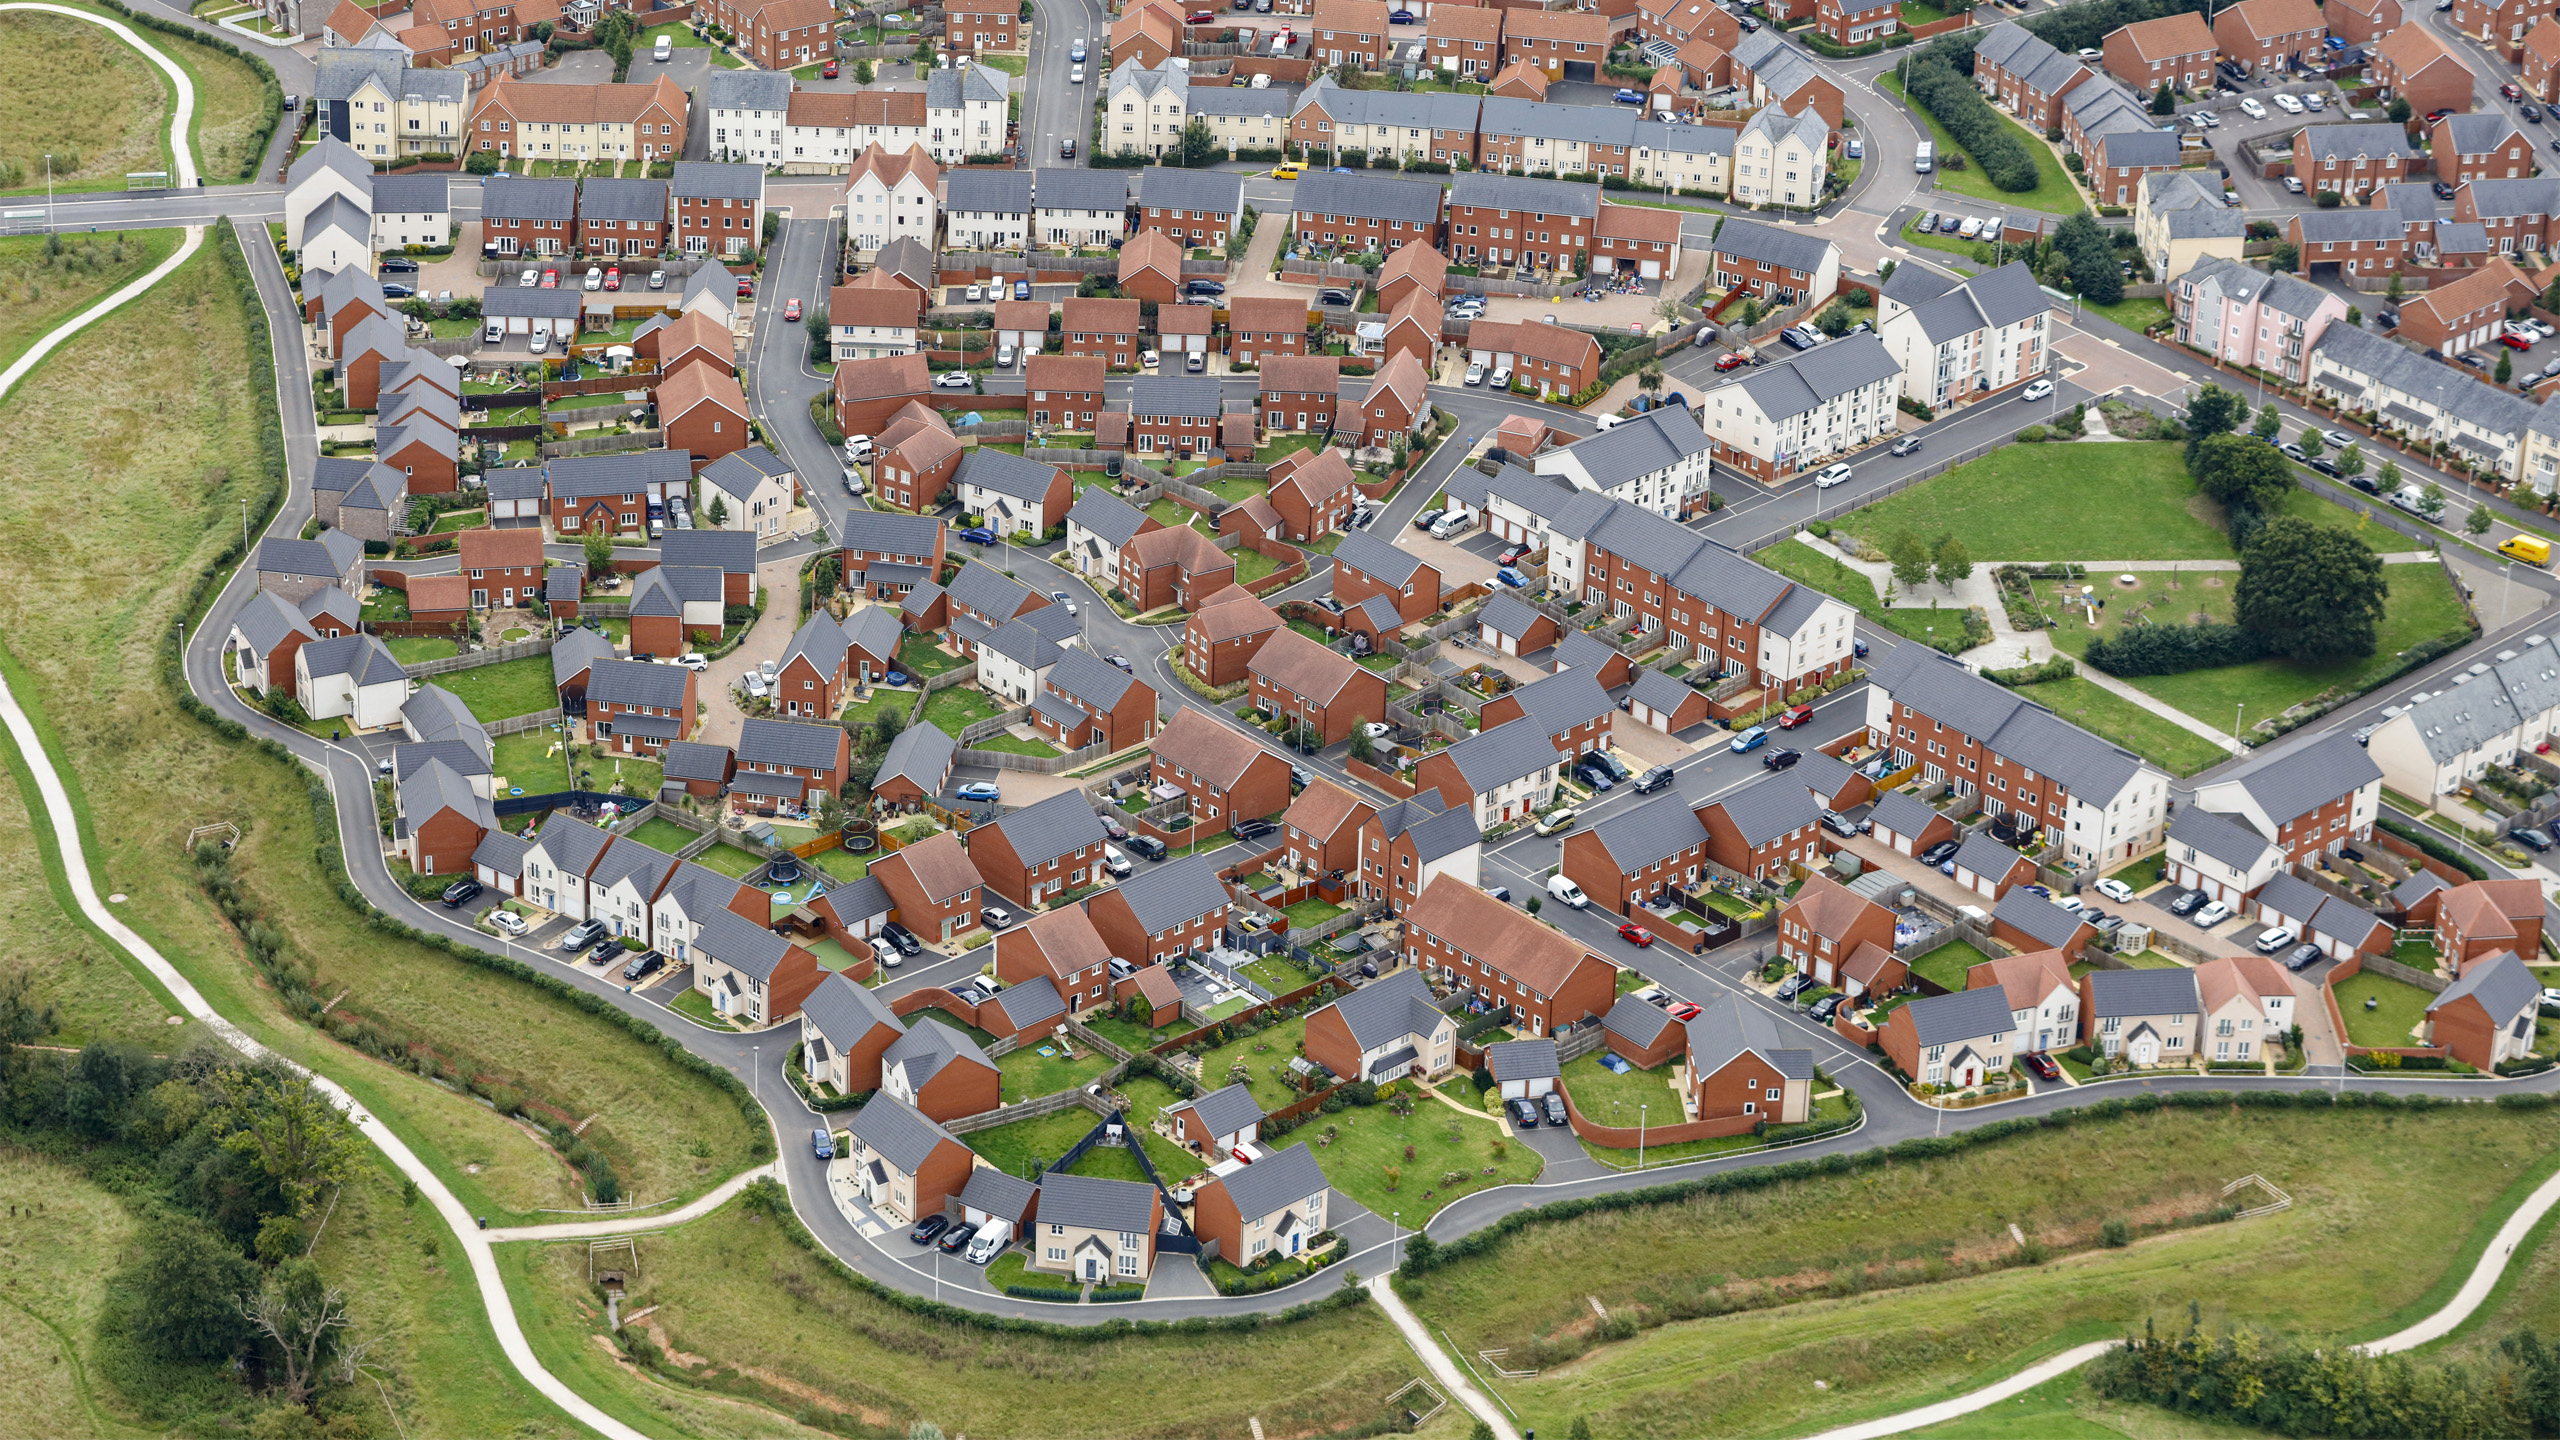 Development of new homes with land planning permission.